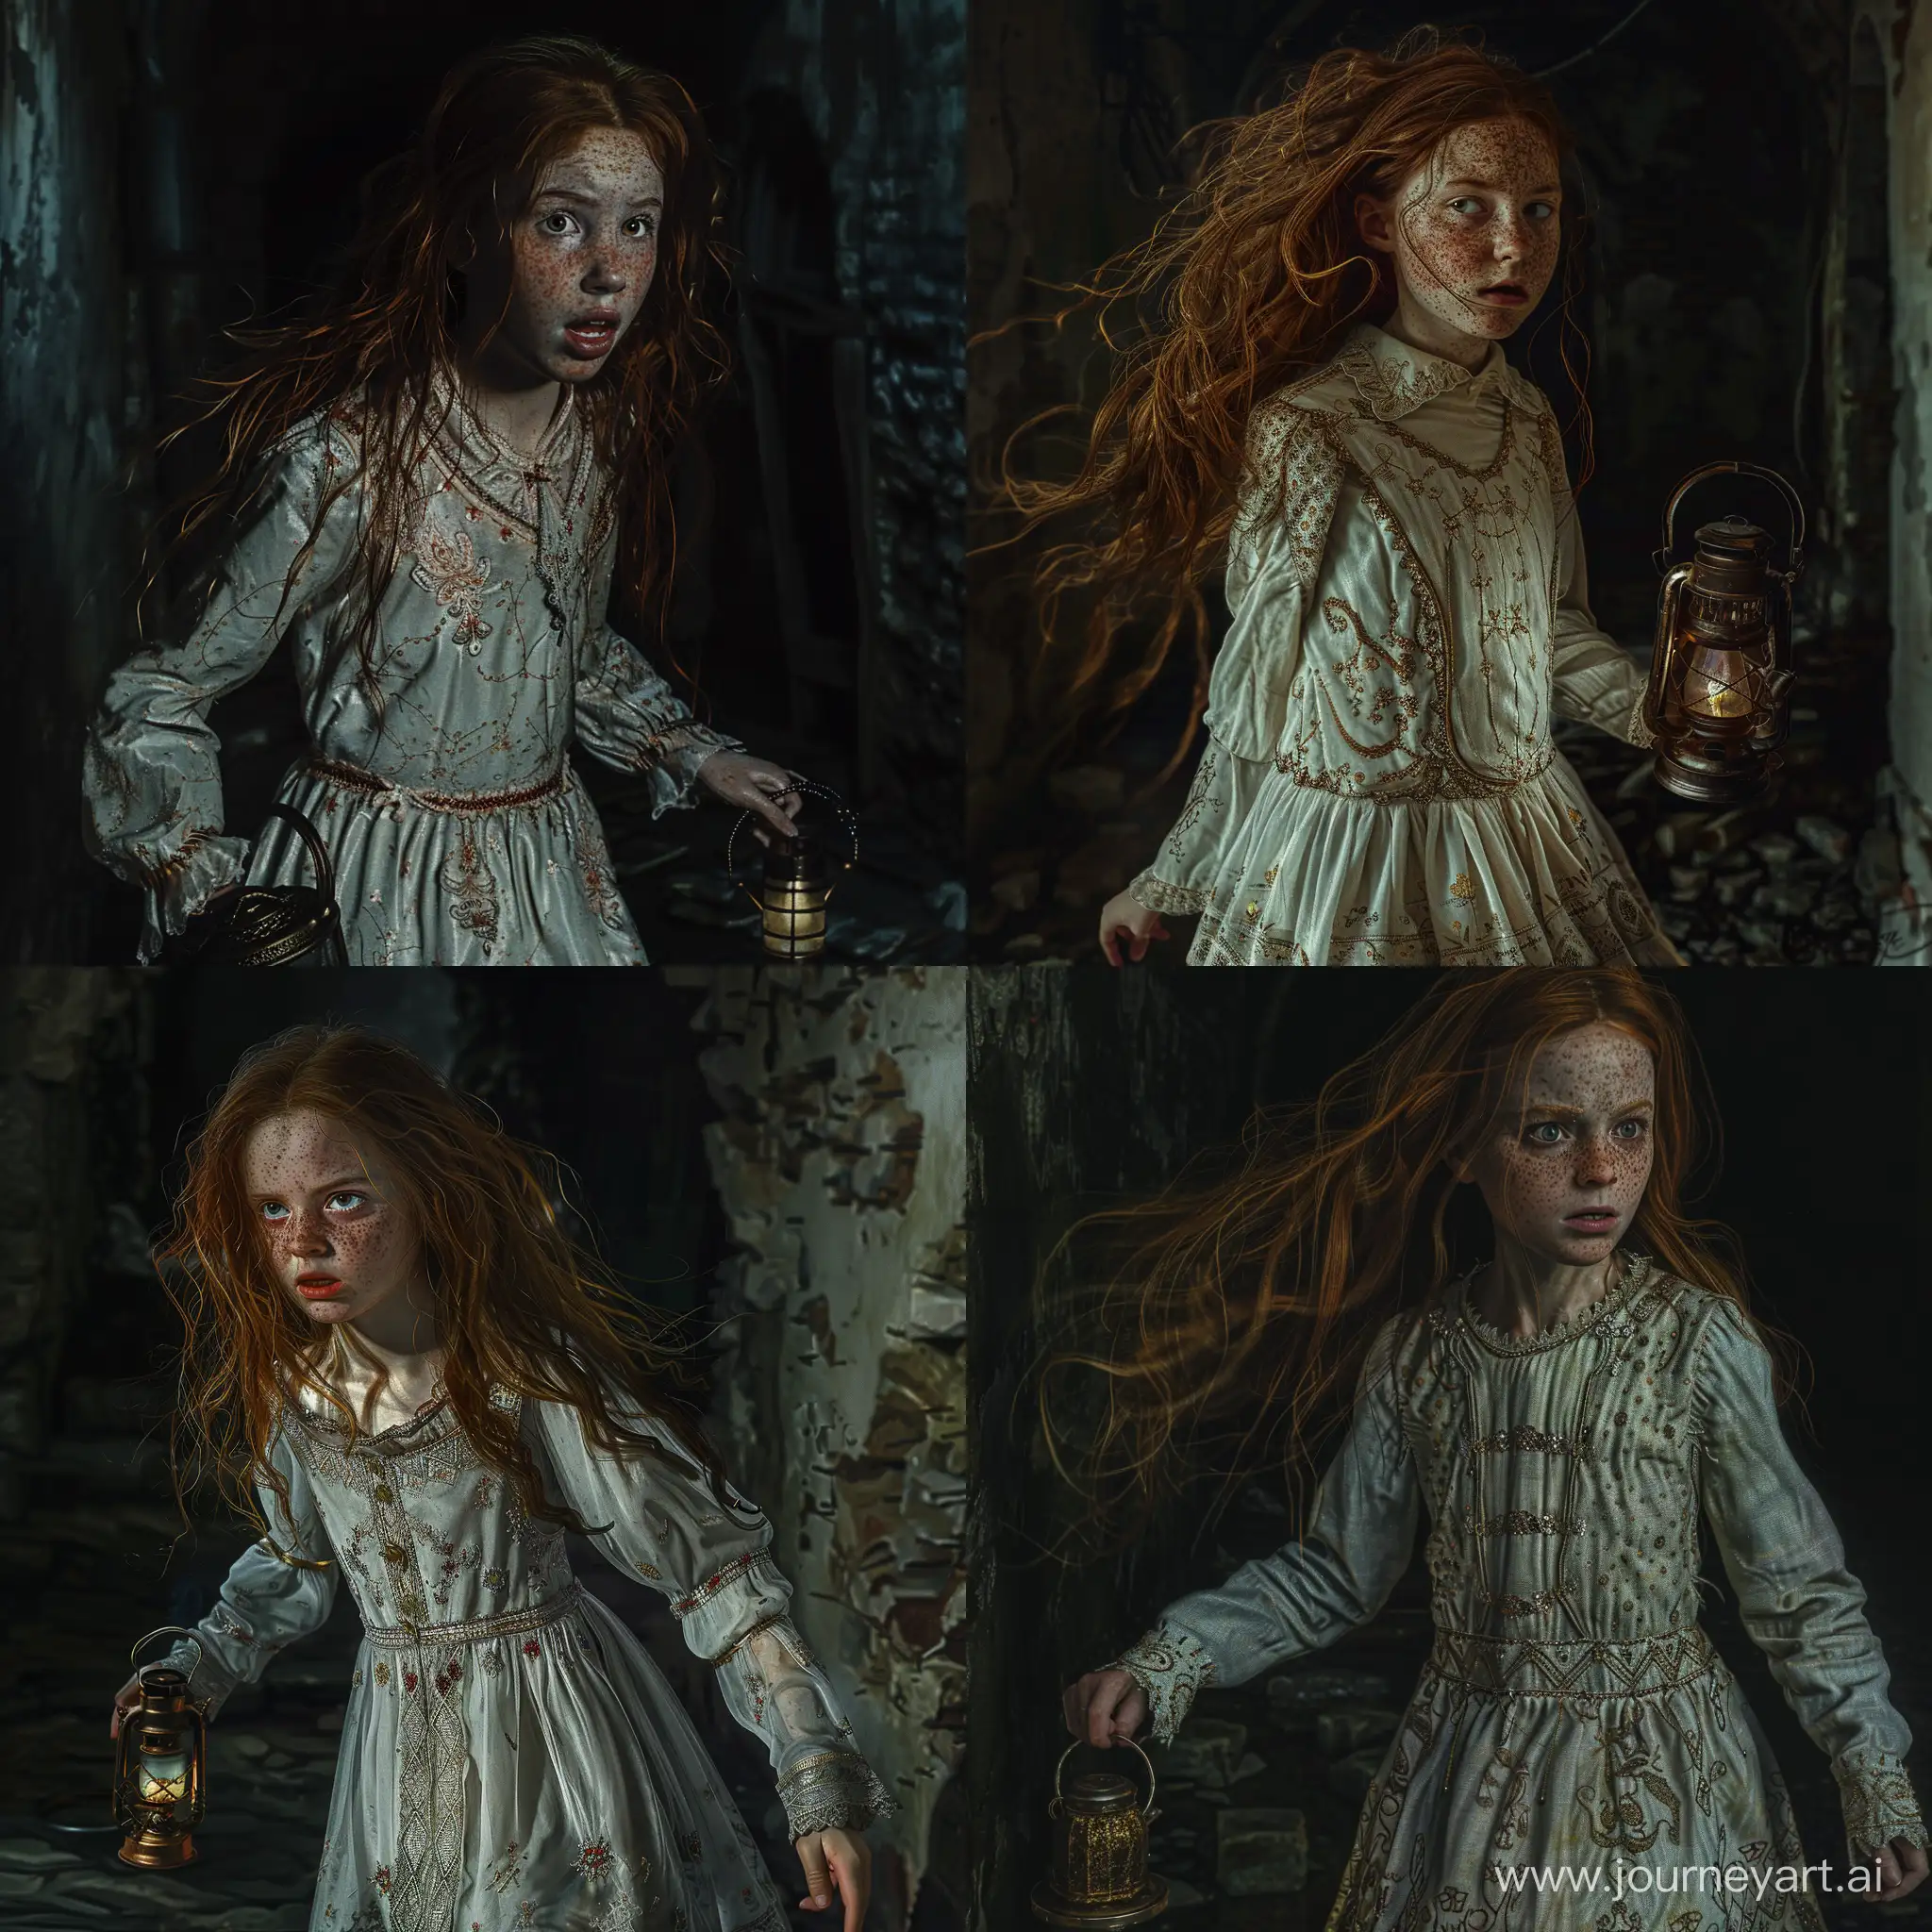 Frightened-Freckled-Young-Girl-in-Intricate-Dress-Explores-Dark-Dungeon-with-Antique-Lantern